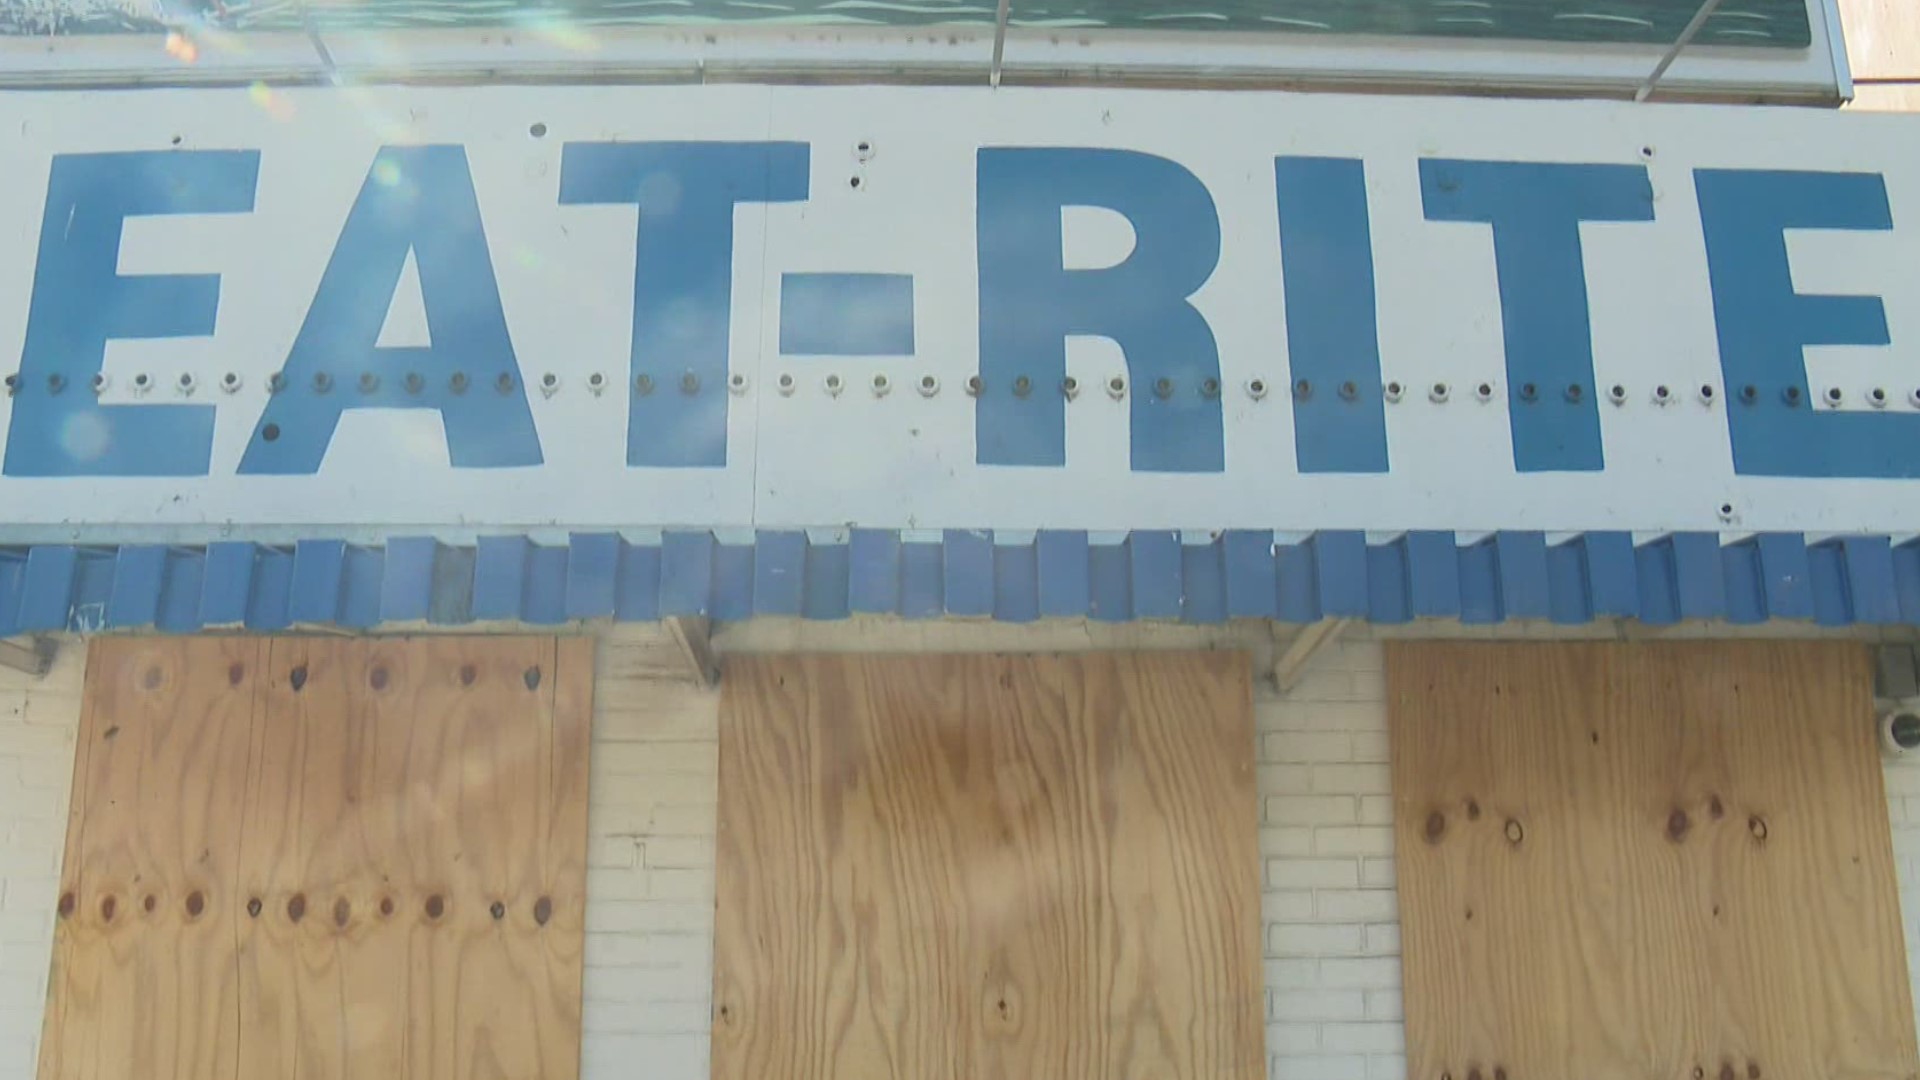 St. Louis has some outstanding places to eat. One spot is about to make a comeback thanks to a local chef who believes the Eat Rite is just right for him.